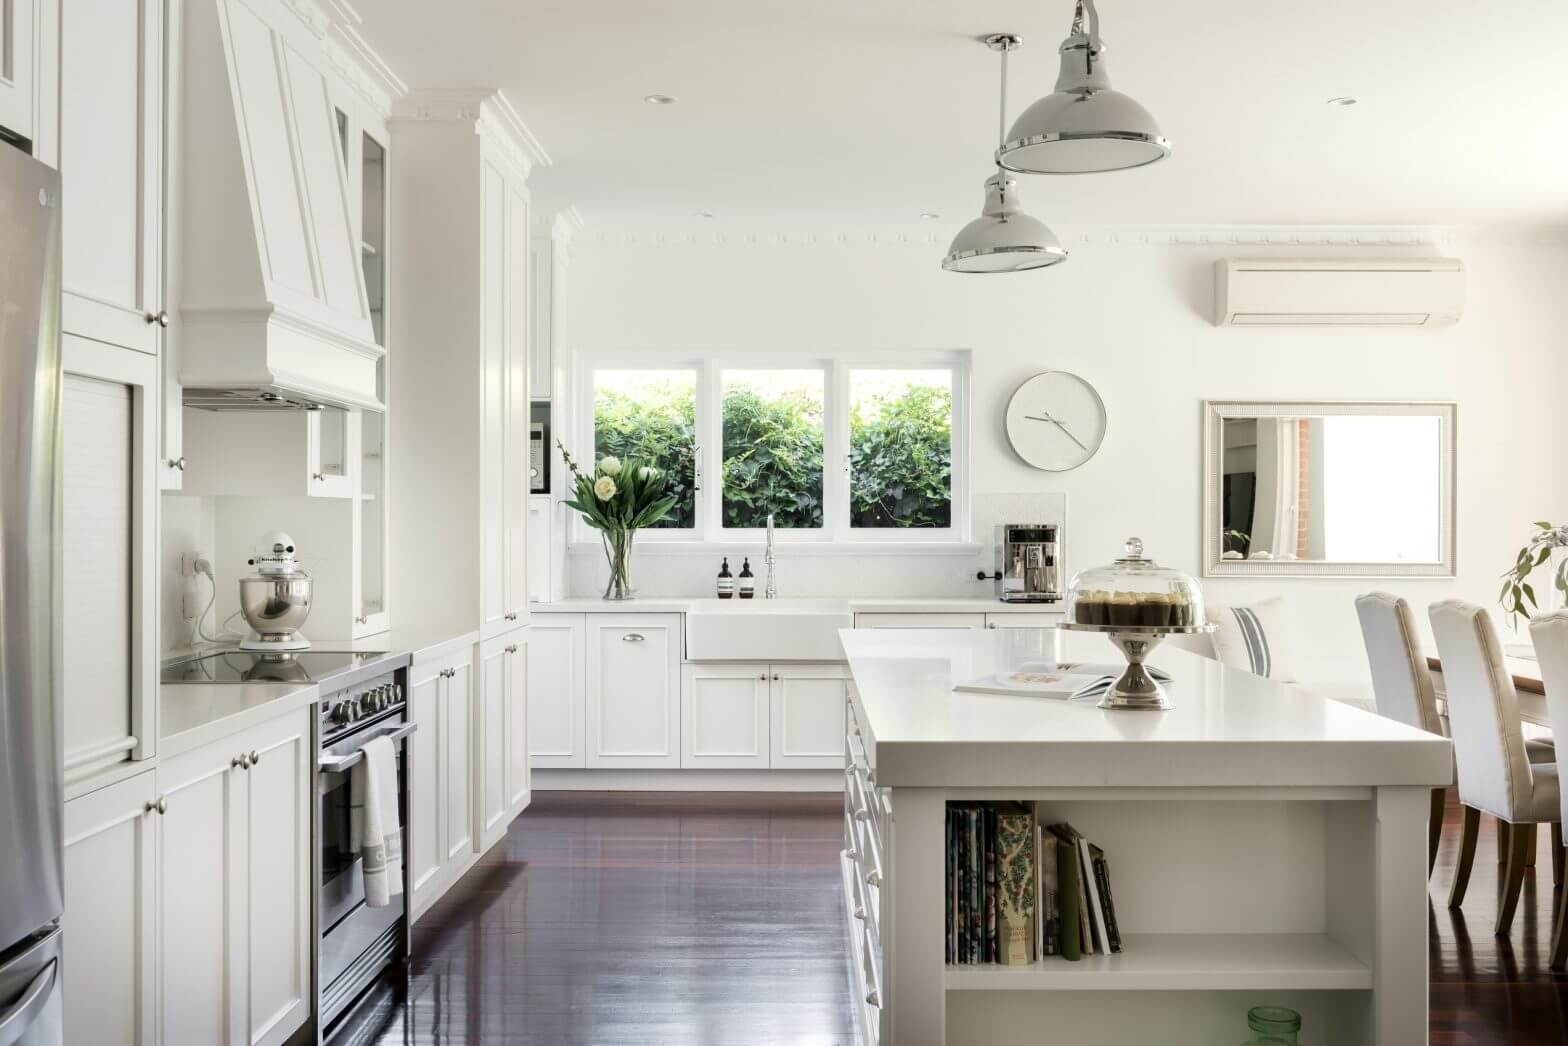 Design features of a Hamptons style kitchen